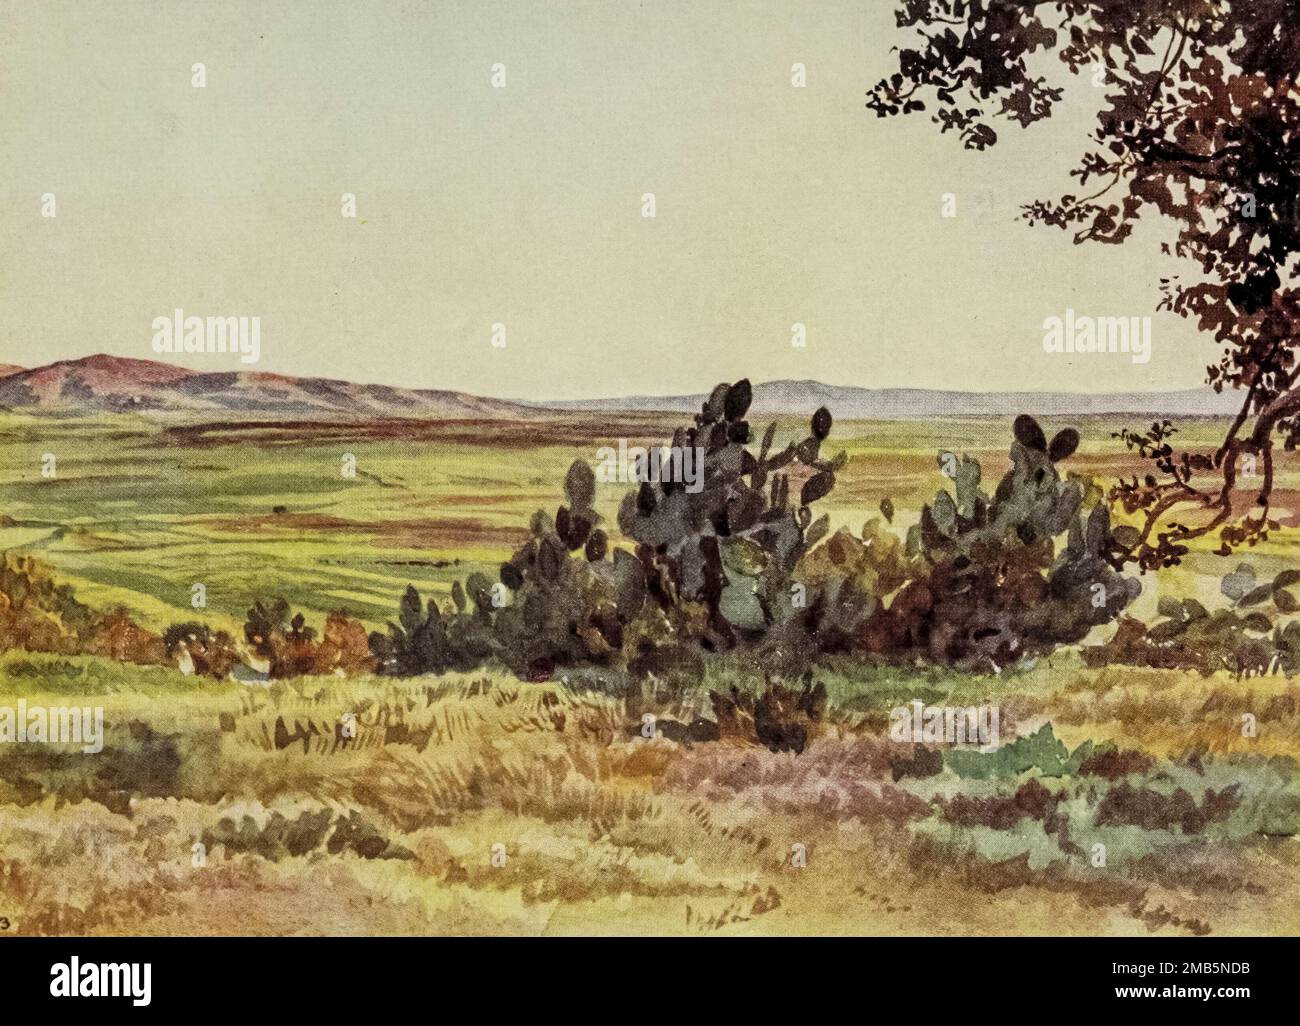 The Plain of Esdraelon, from foot of Tabor, with the village of Naim in distance from the book ' Letters from the Holy land ' by Elizabeth Butler, Published in London by Adam & Charles Black first published in 1903 and reprint in 1906 Stock Photo